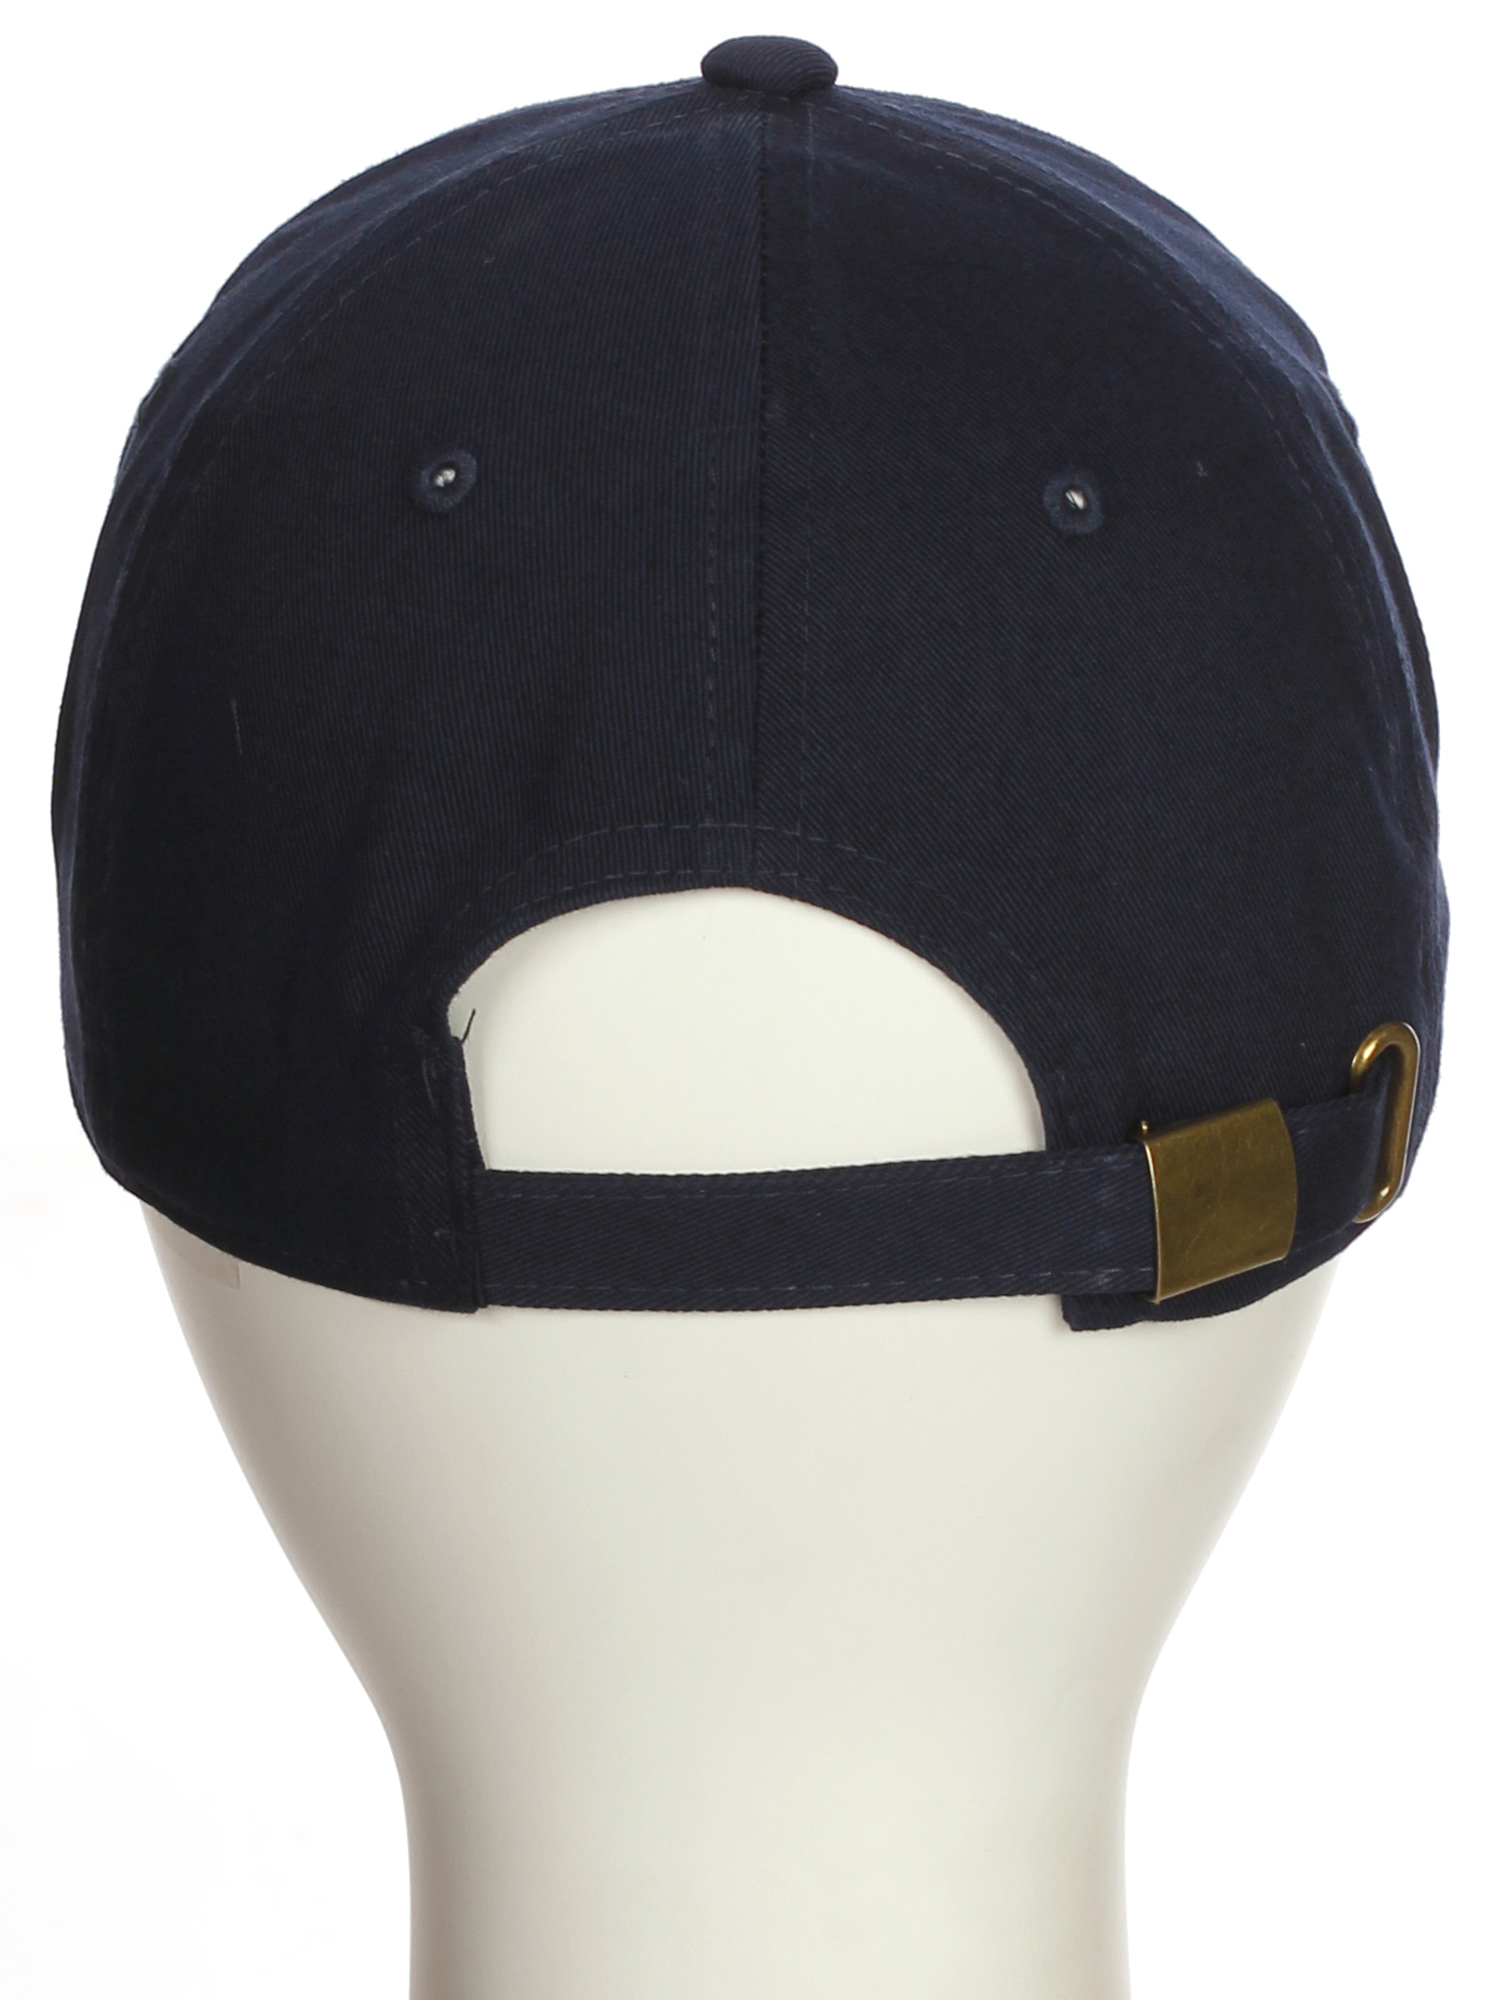 Customized Number Hat 00 to 99 Team Colors Baseball Cap, Navy Hat White Blue Number 52 - image 4 of 4